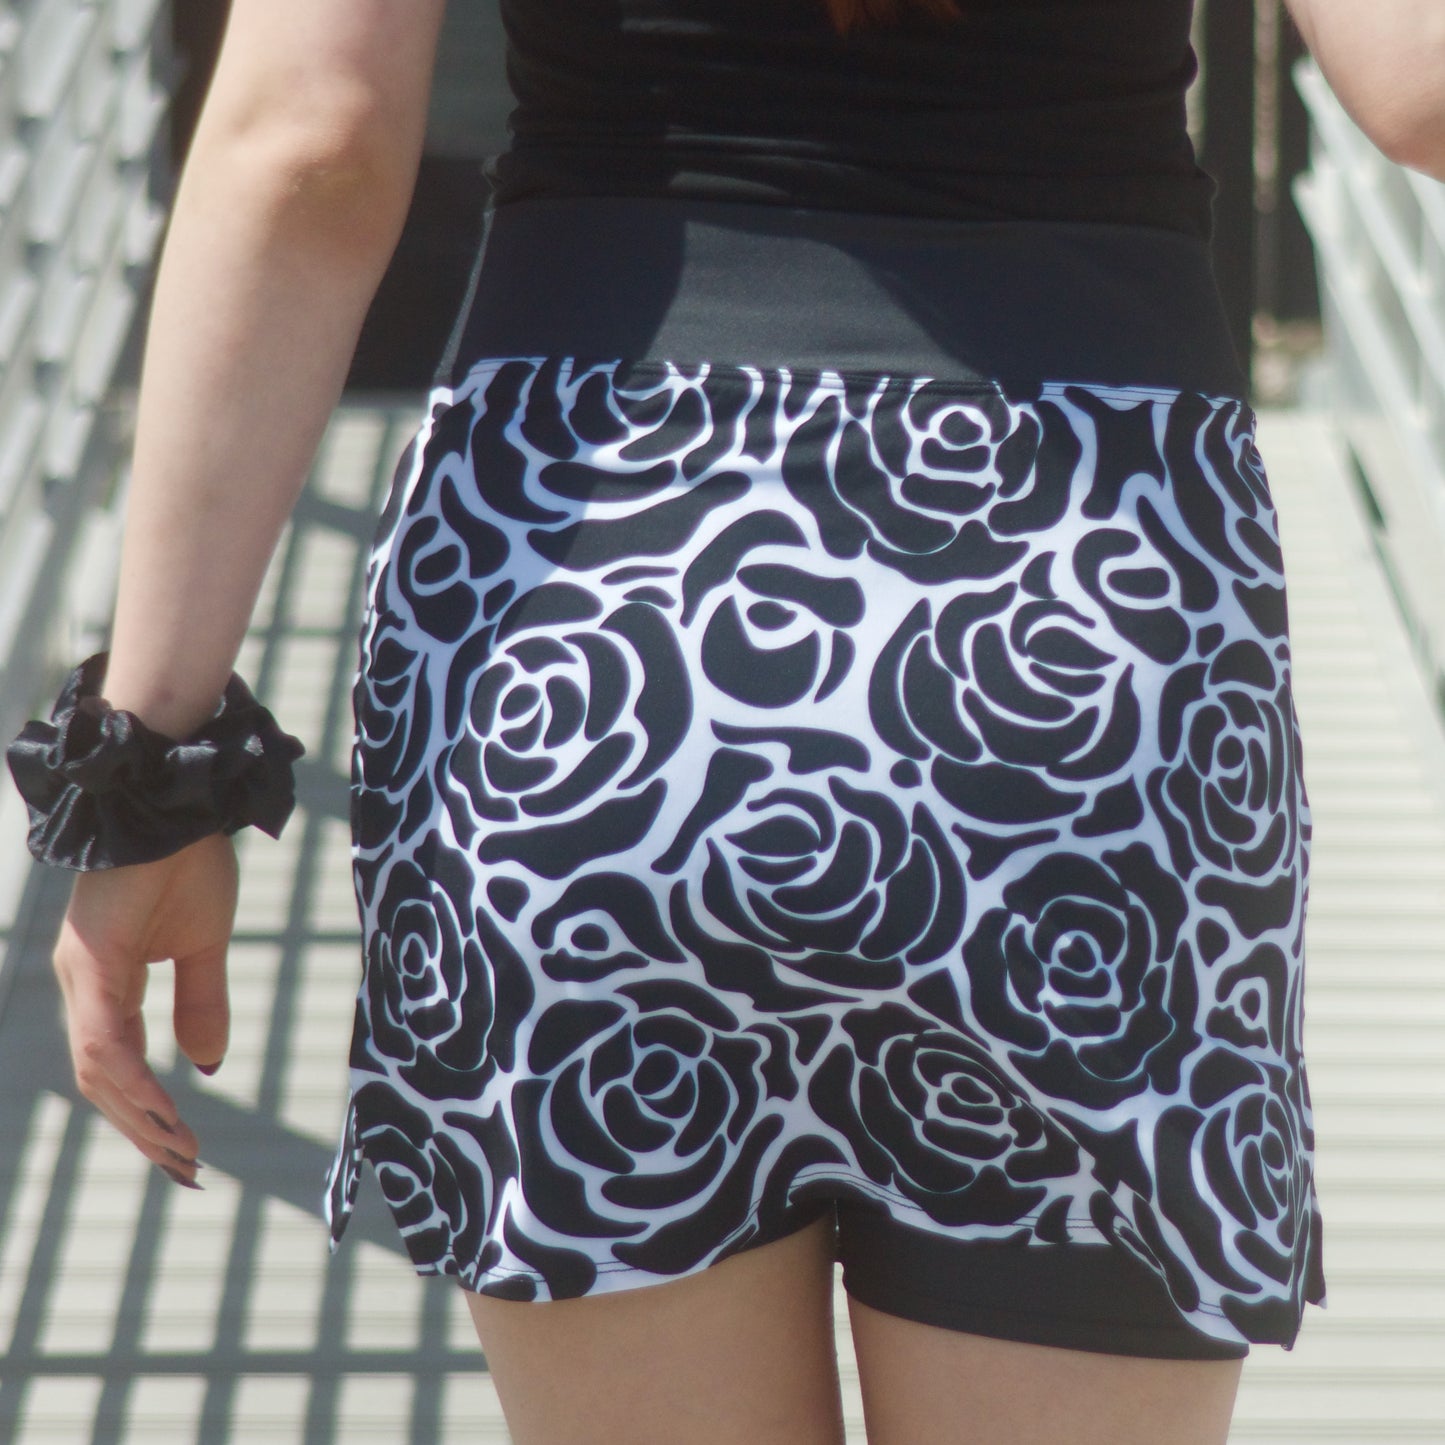 black and white skort with roses